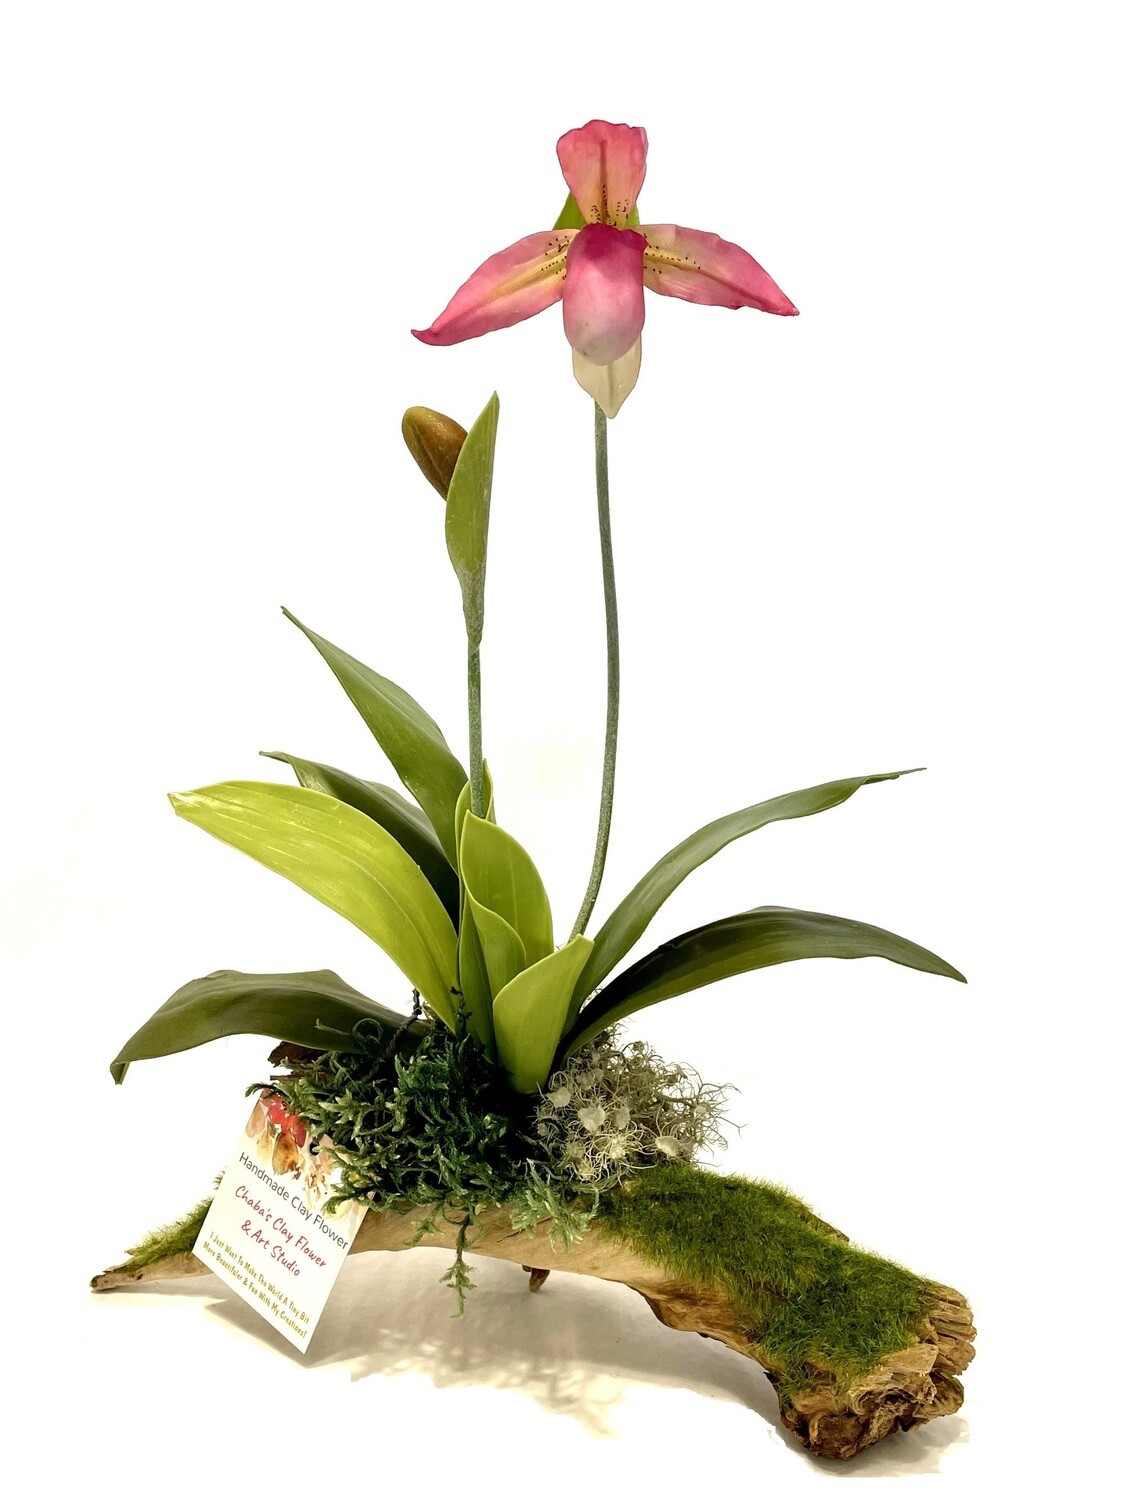 Single Pink Lady Slipper Orchard on Driftwood